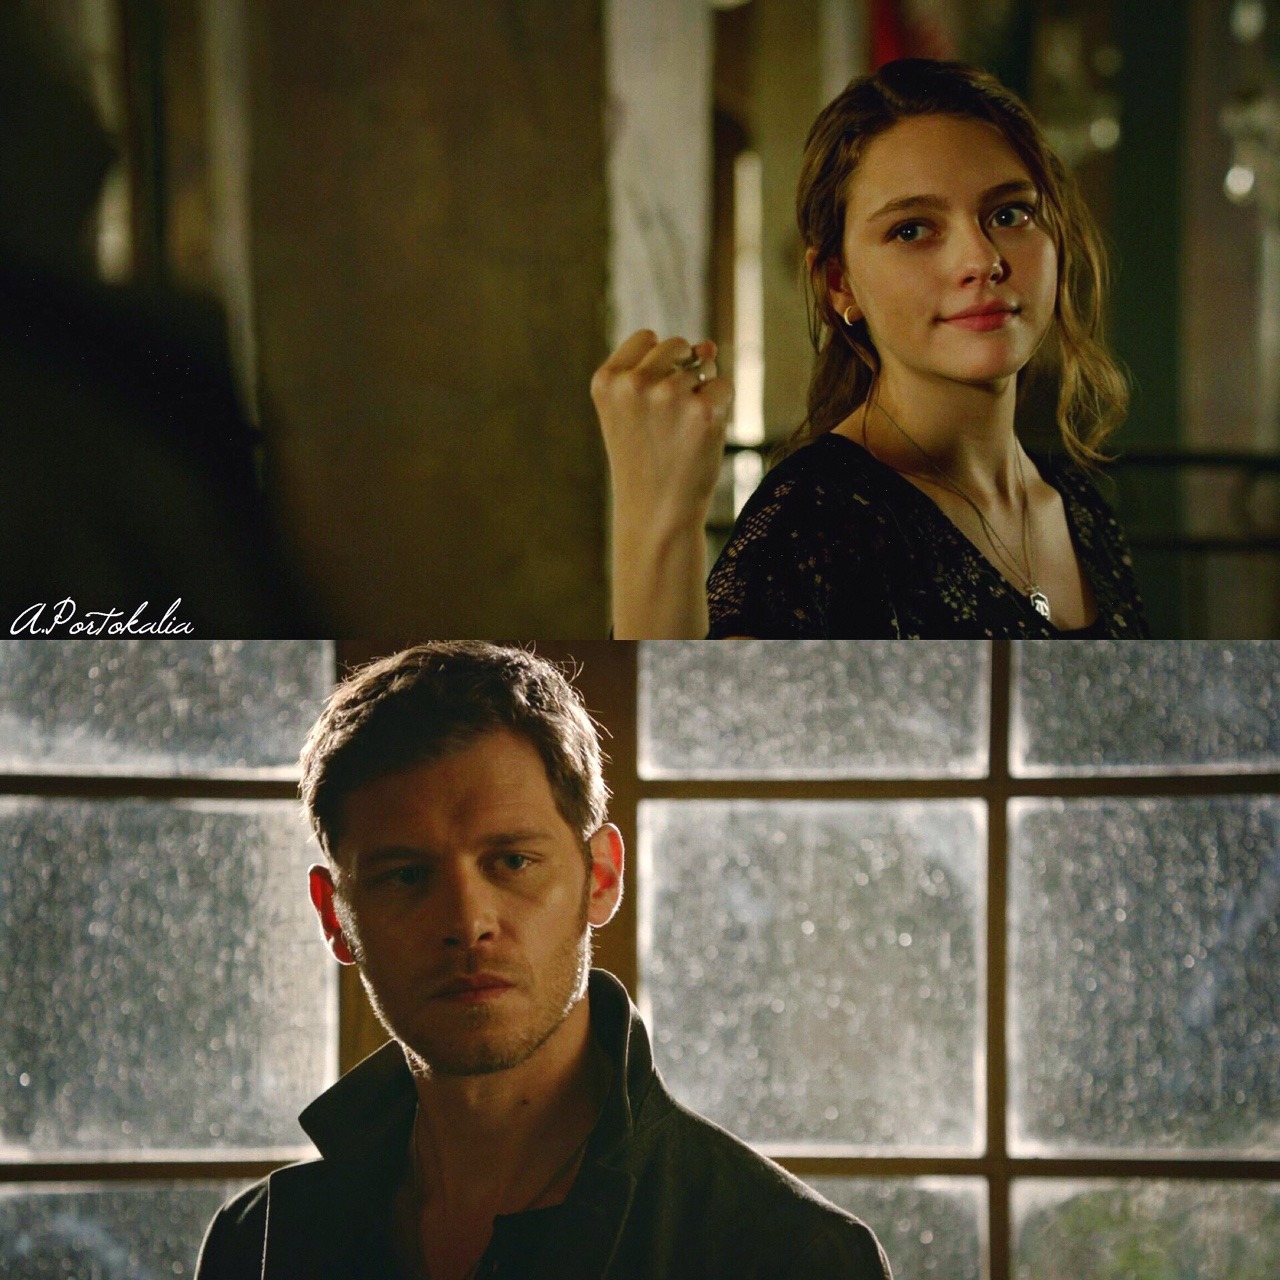 klope the originals klaus mikaelson hope mikaelson joseph morgan danielle rose russell father and daughter   lahesa.tumblr.com